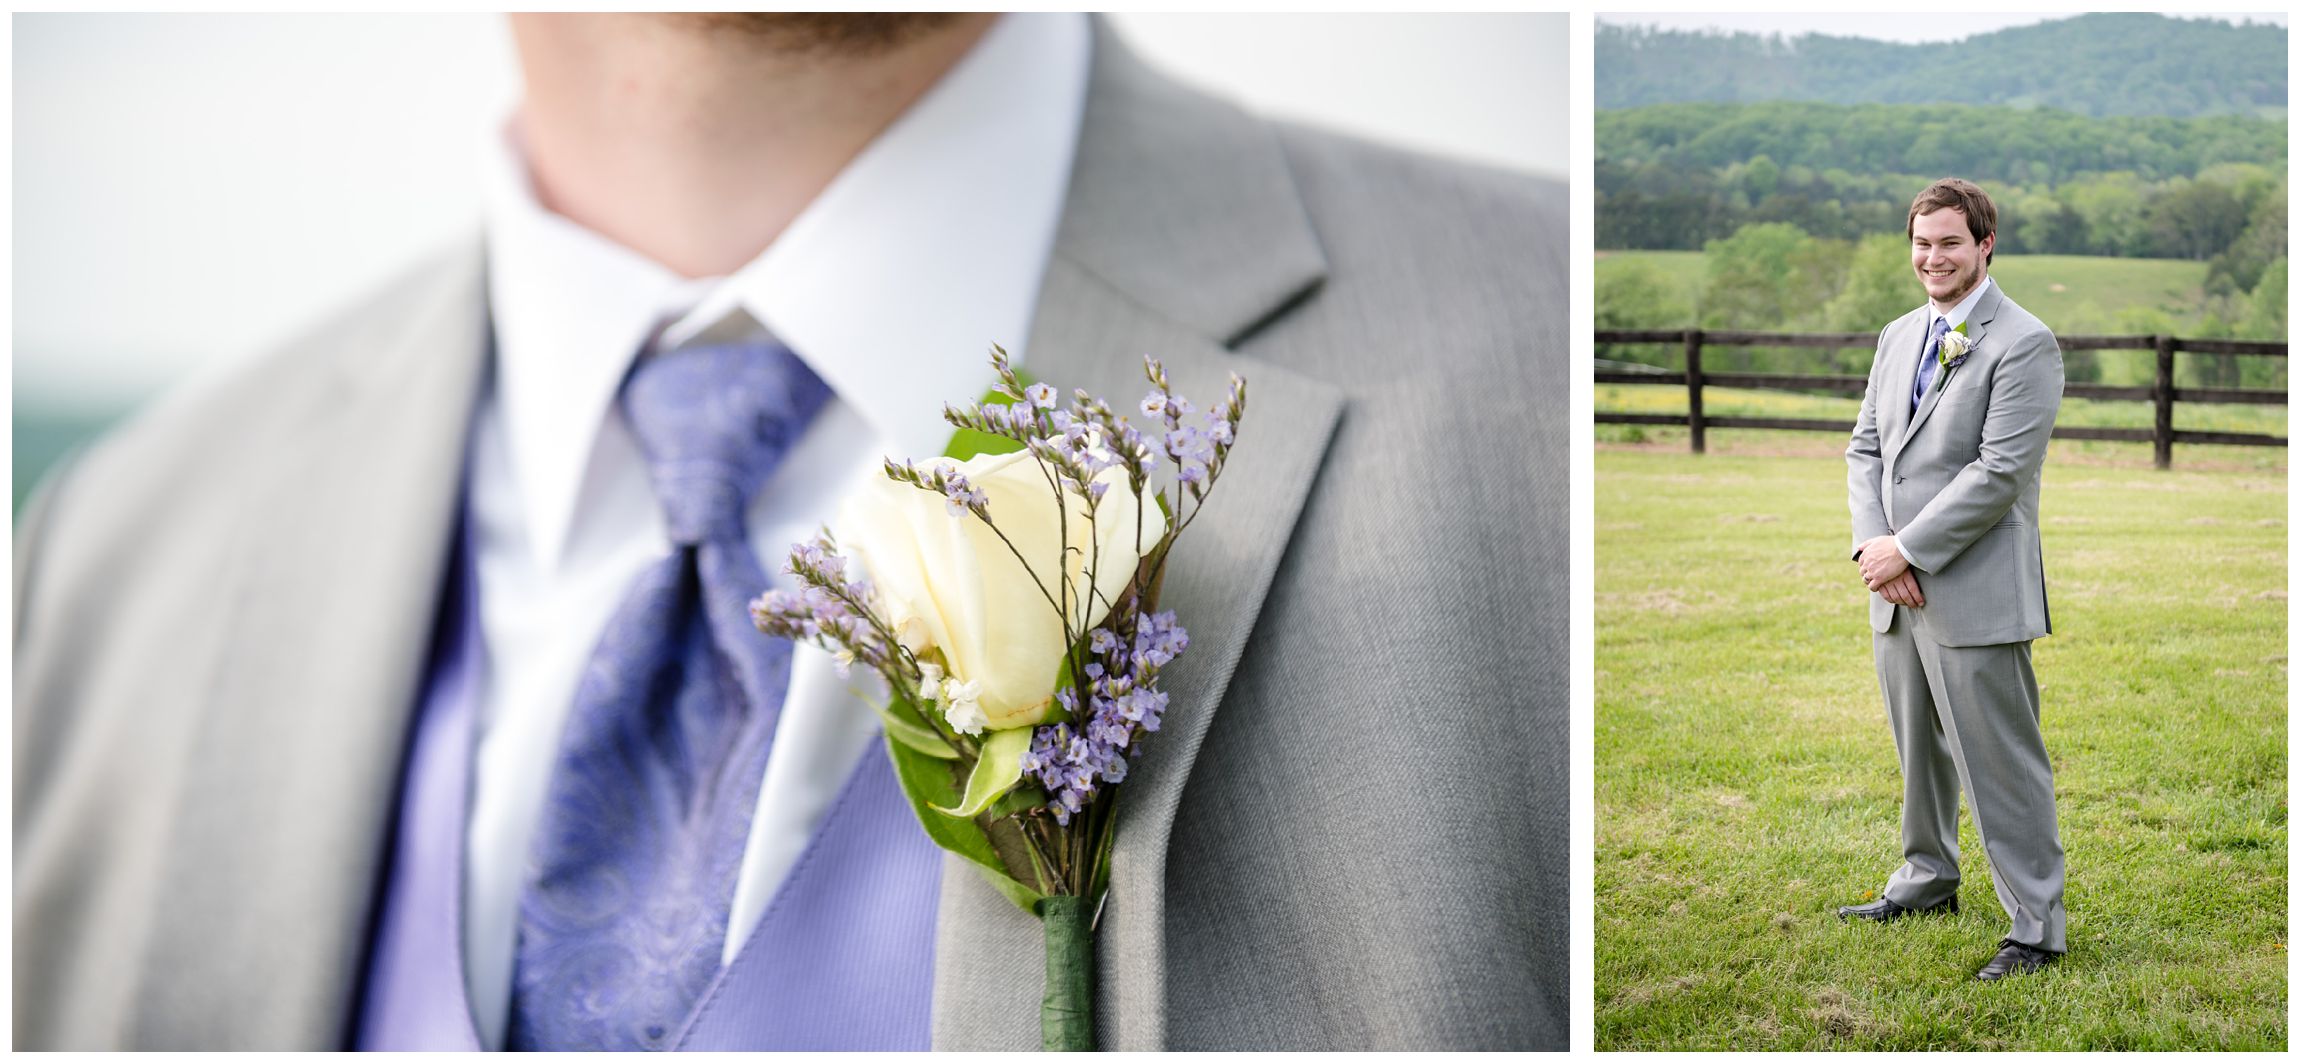 groom with purple tie and boutonniere 